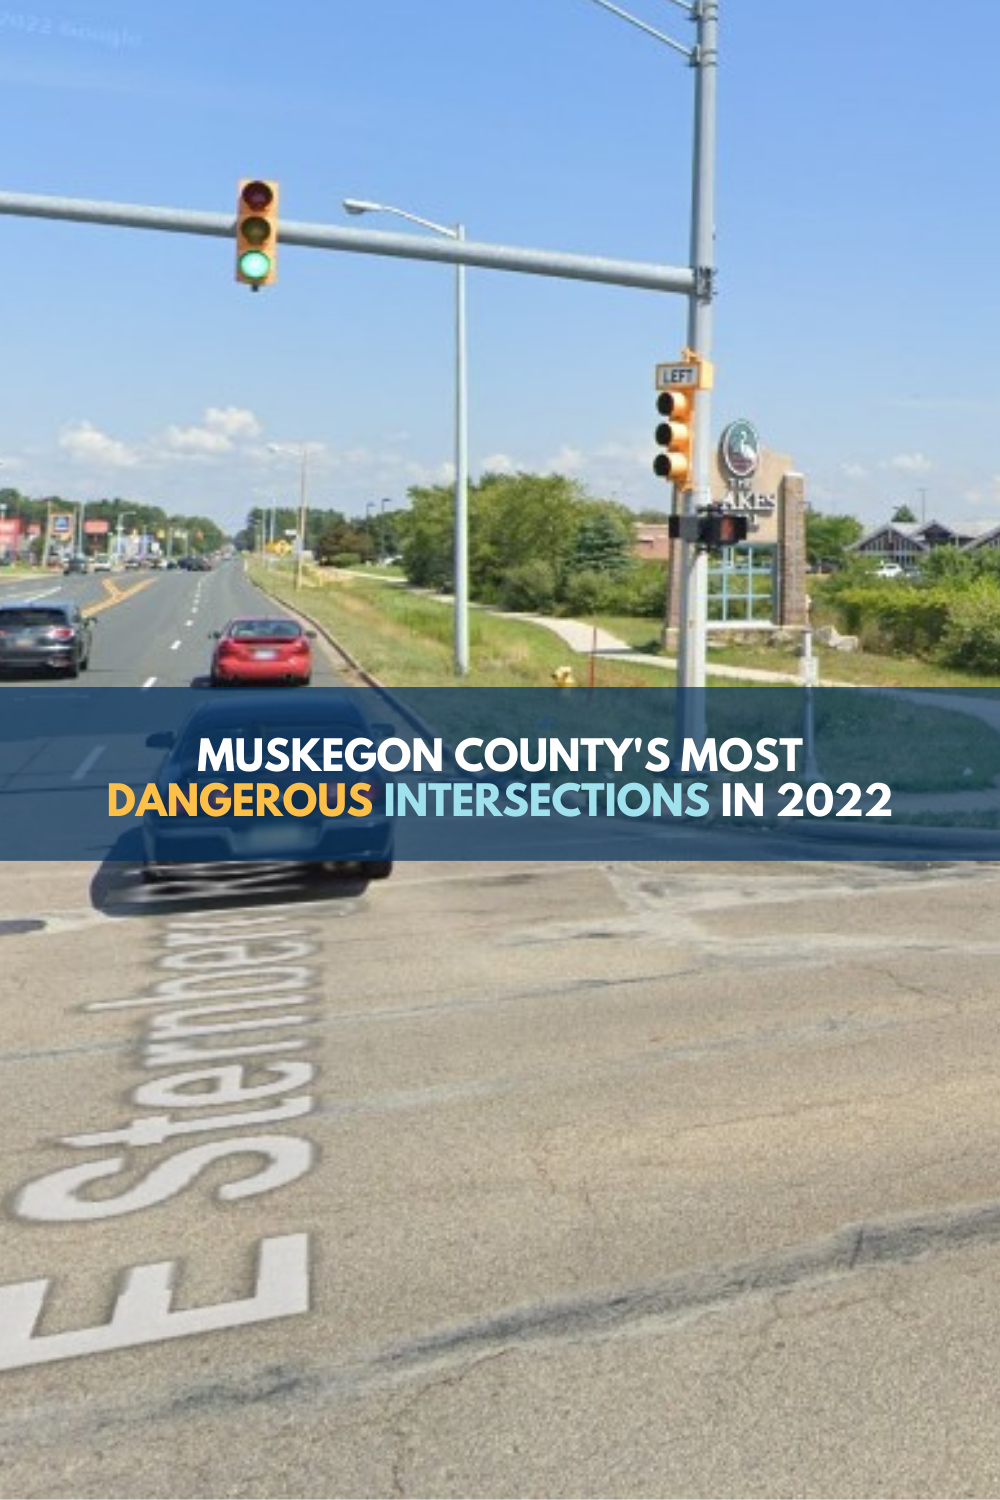 Muskegon County’s Most Dangerous Intersections in 2022